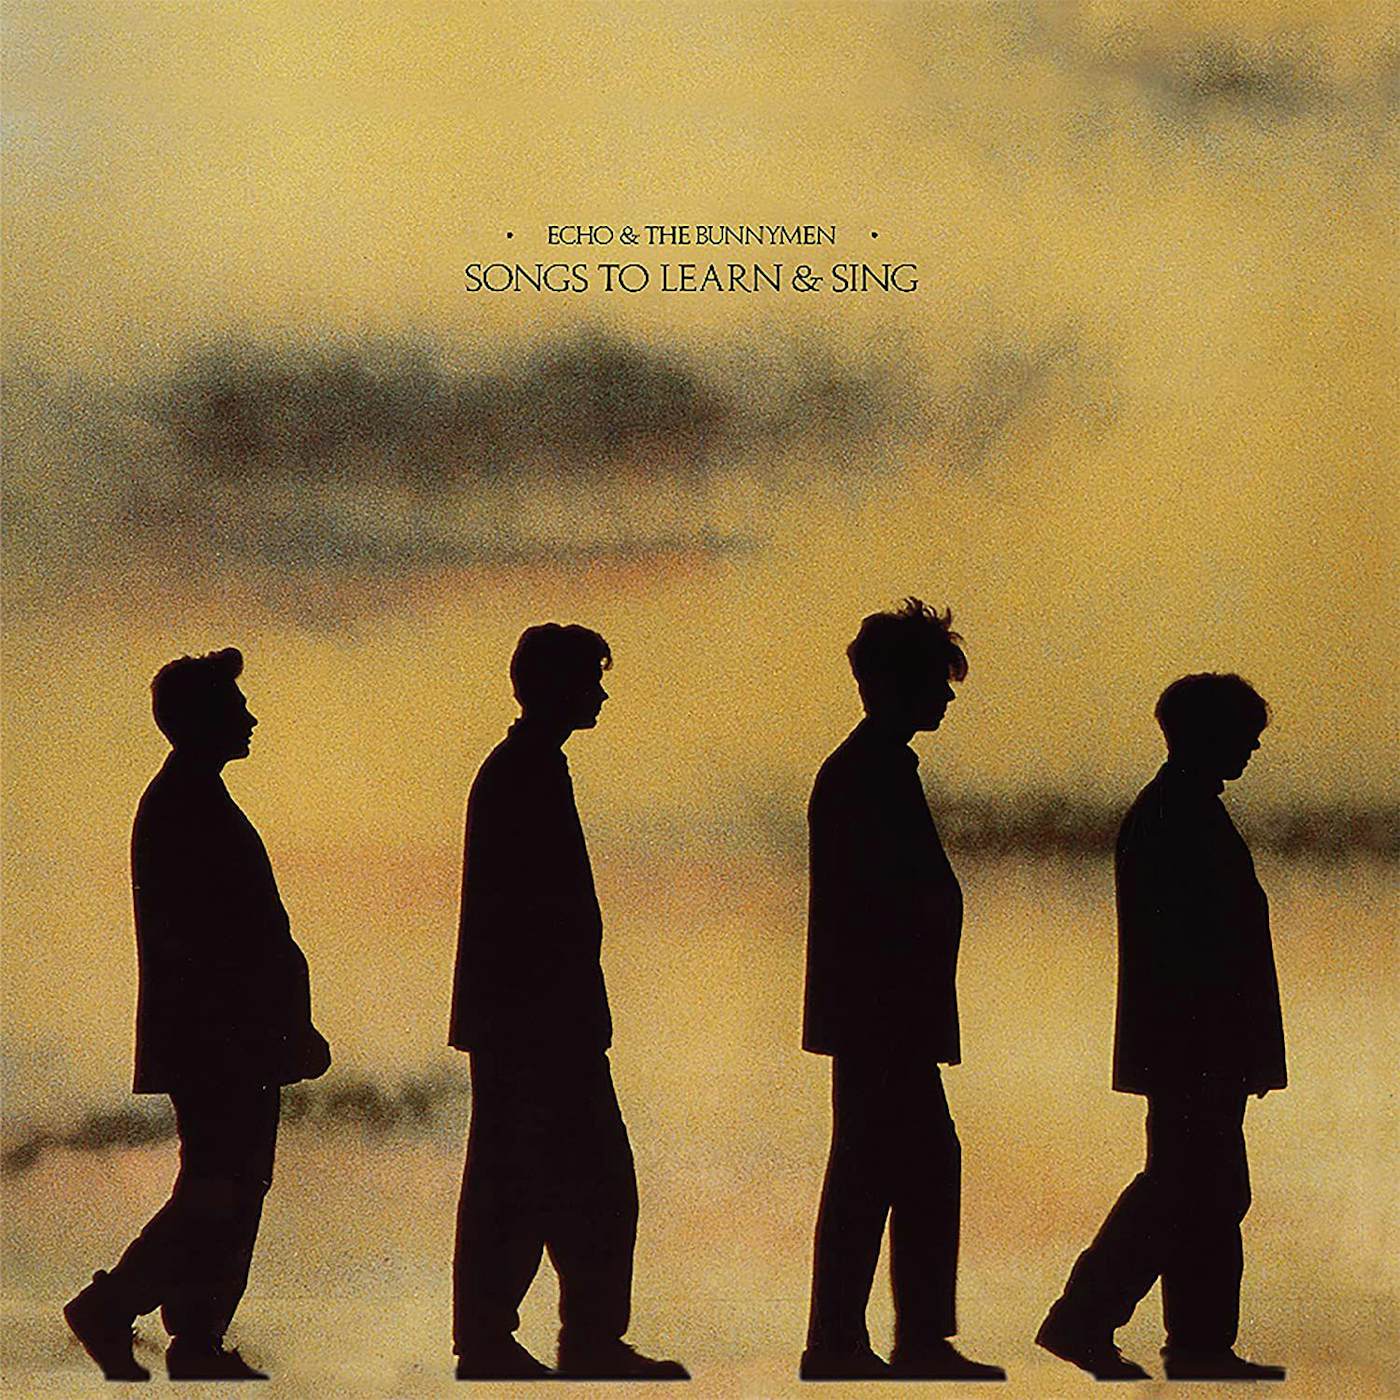 Echo & the Bunnymen SONGS TO LEARN & SING (2021) Vinyl Record